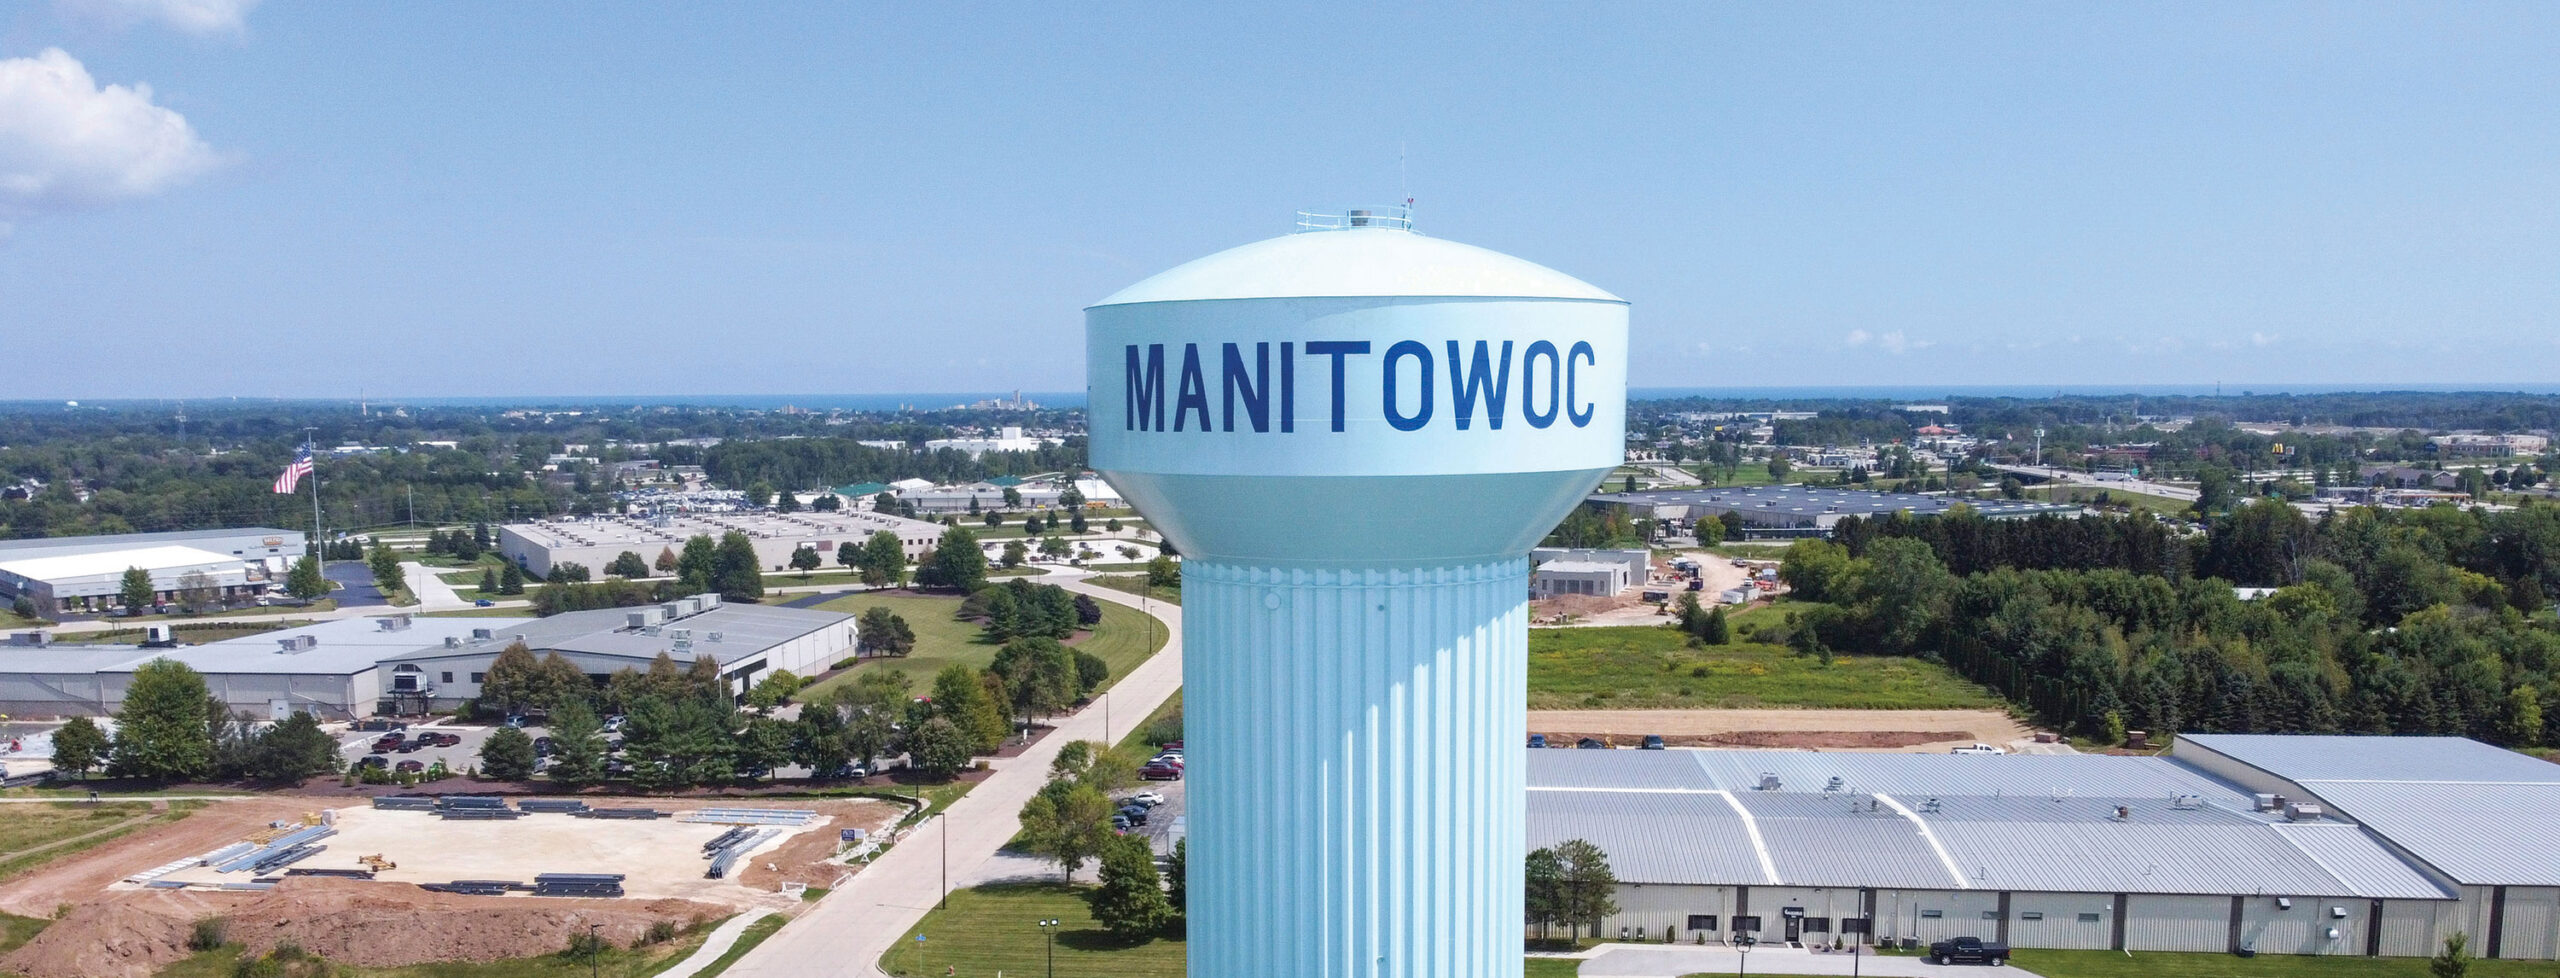 The Manitowoc water tower